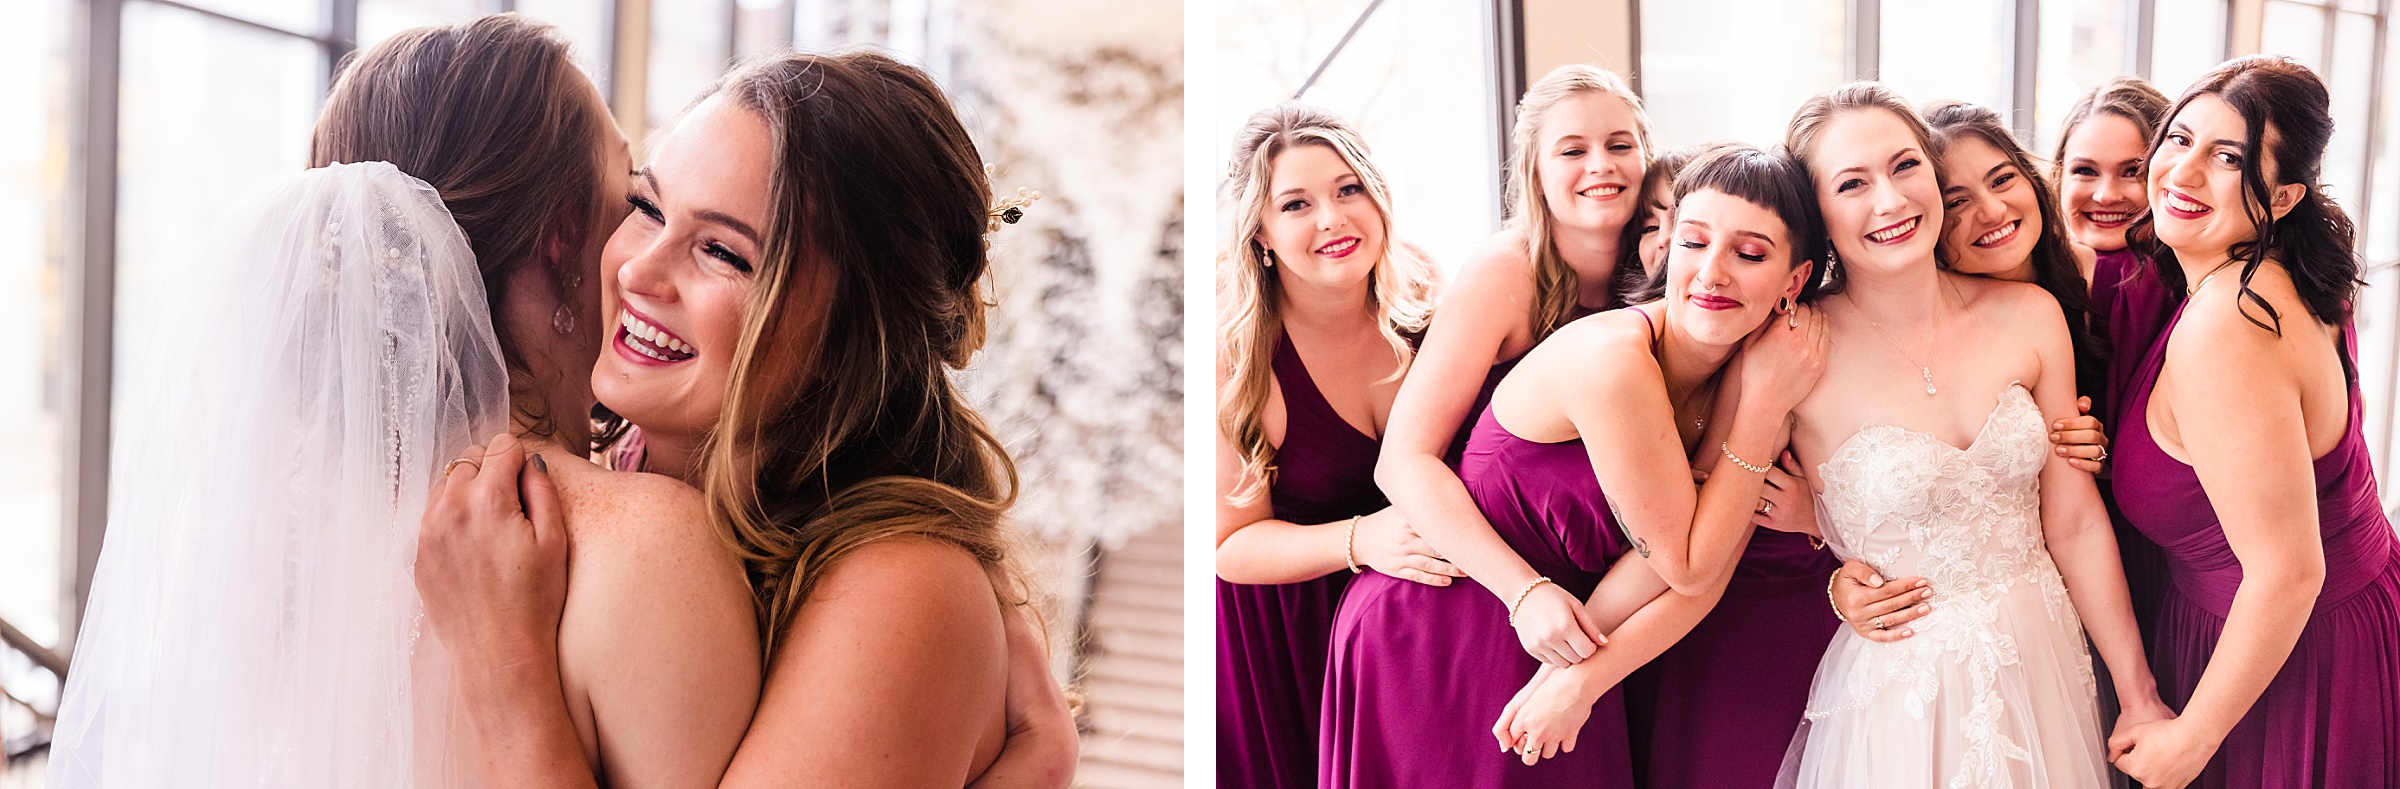 Bridesmaids hug the bride before her wedding at the Hotel Pere Marquette in Peoria, Illinois.